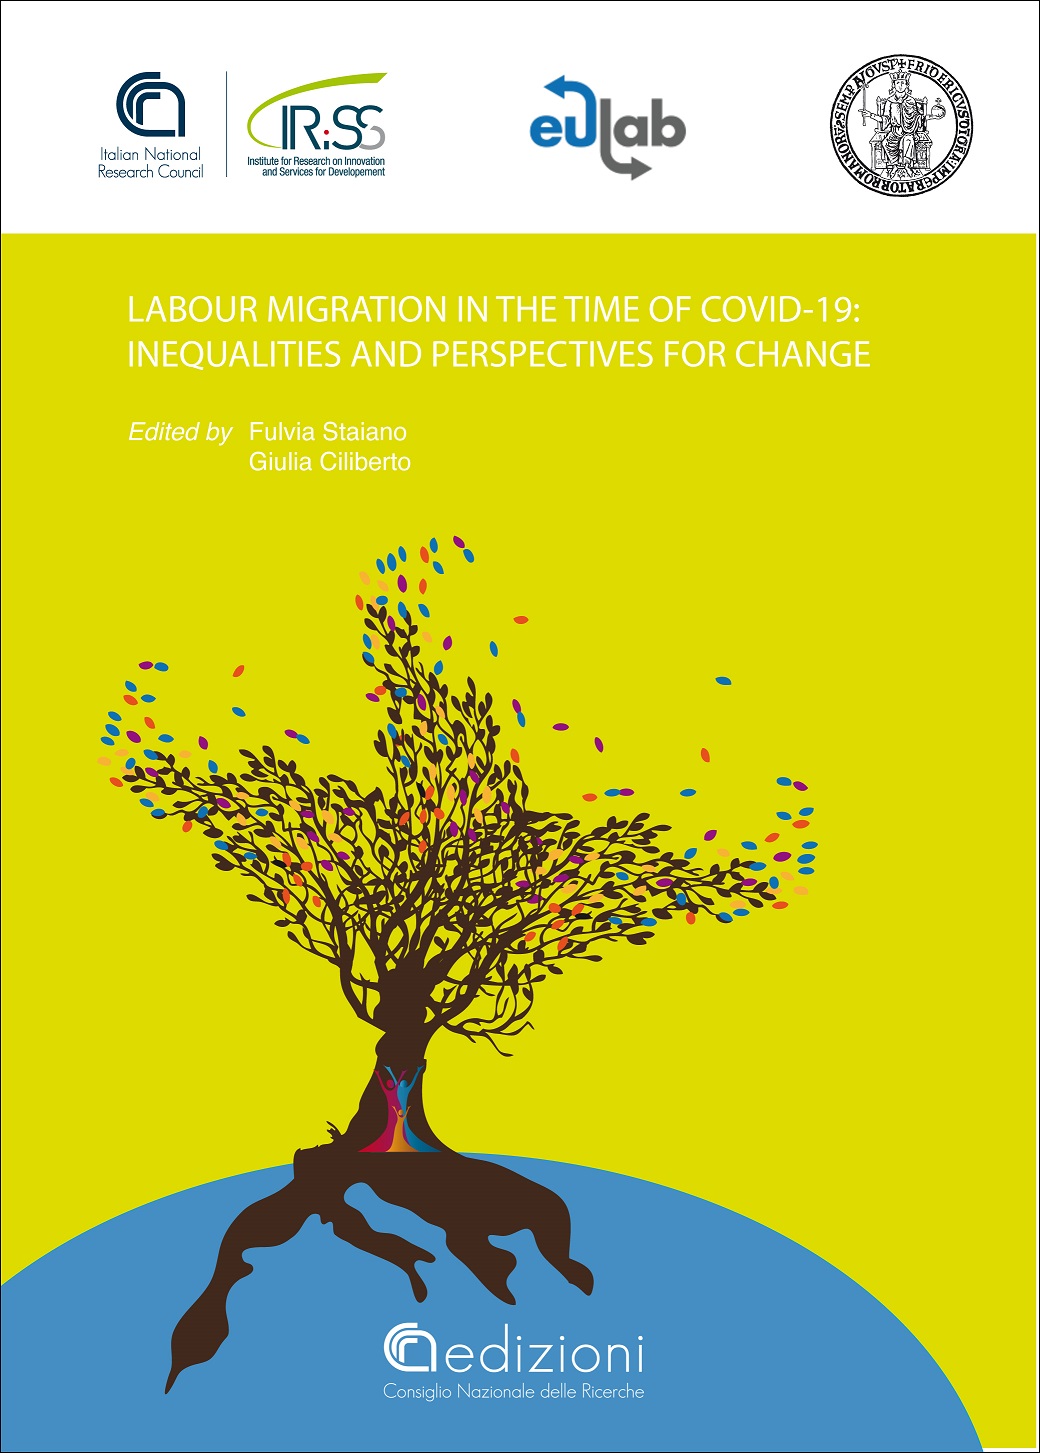 Cover volume "Labour migration in the time of Coviud 19" 